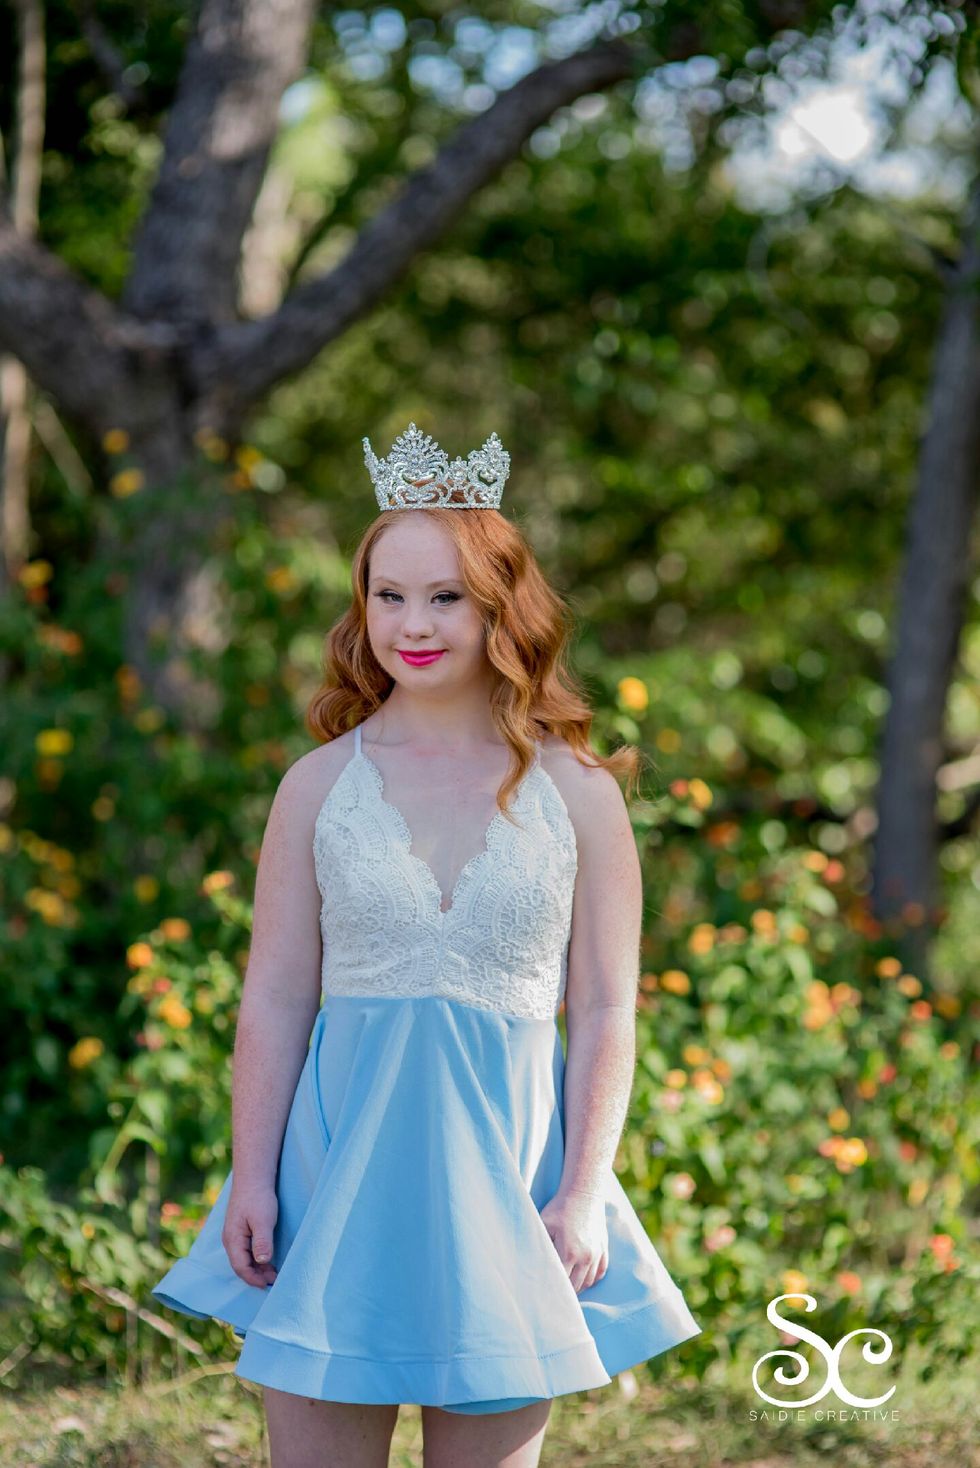 Madeline Stuart - Model With Down Syndrome's Summer Photo Shoot